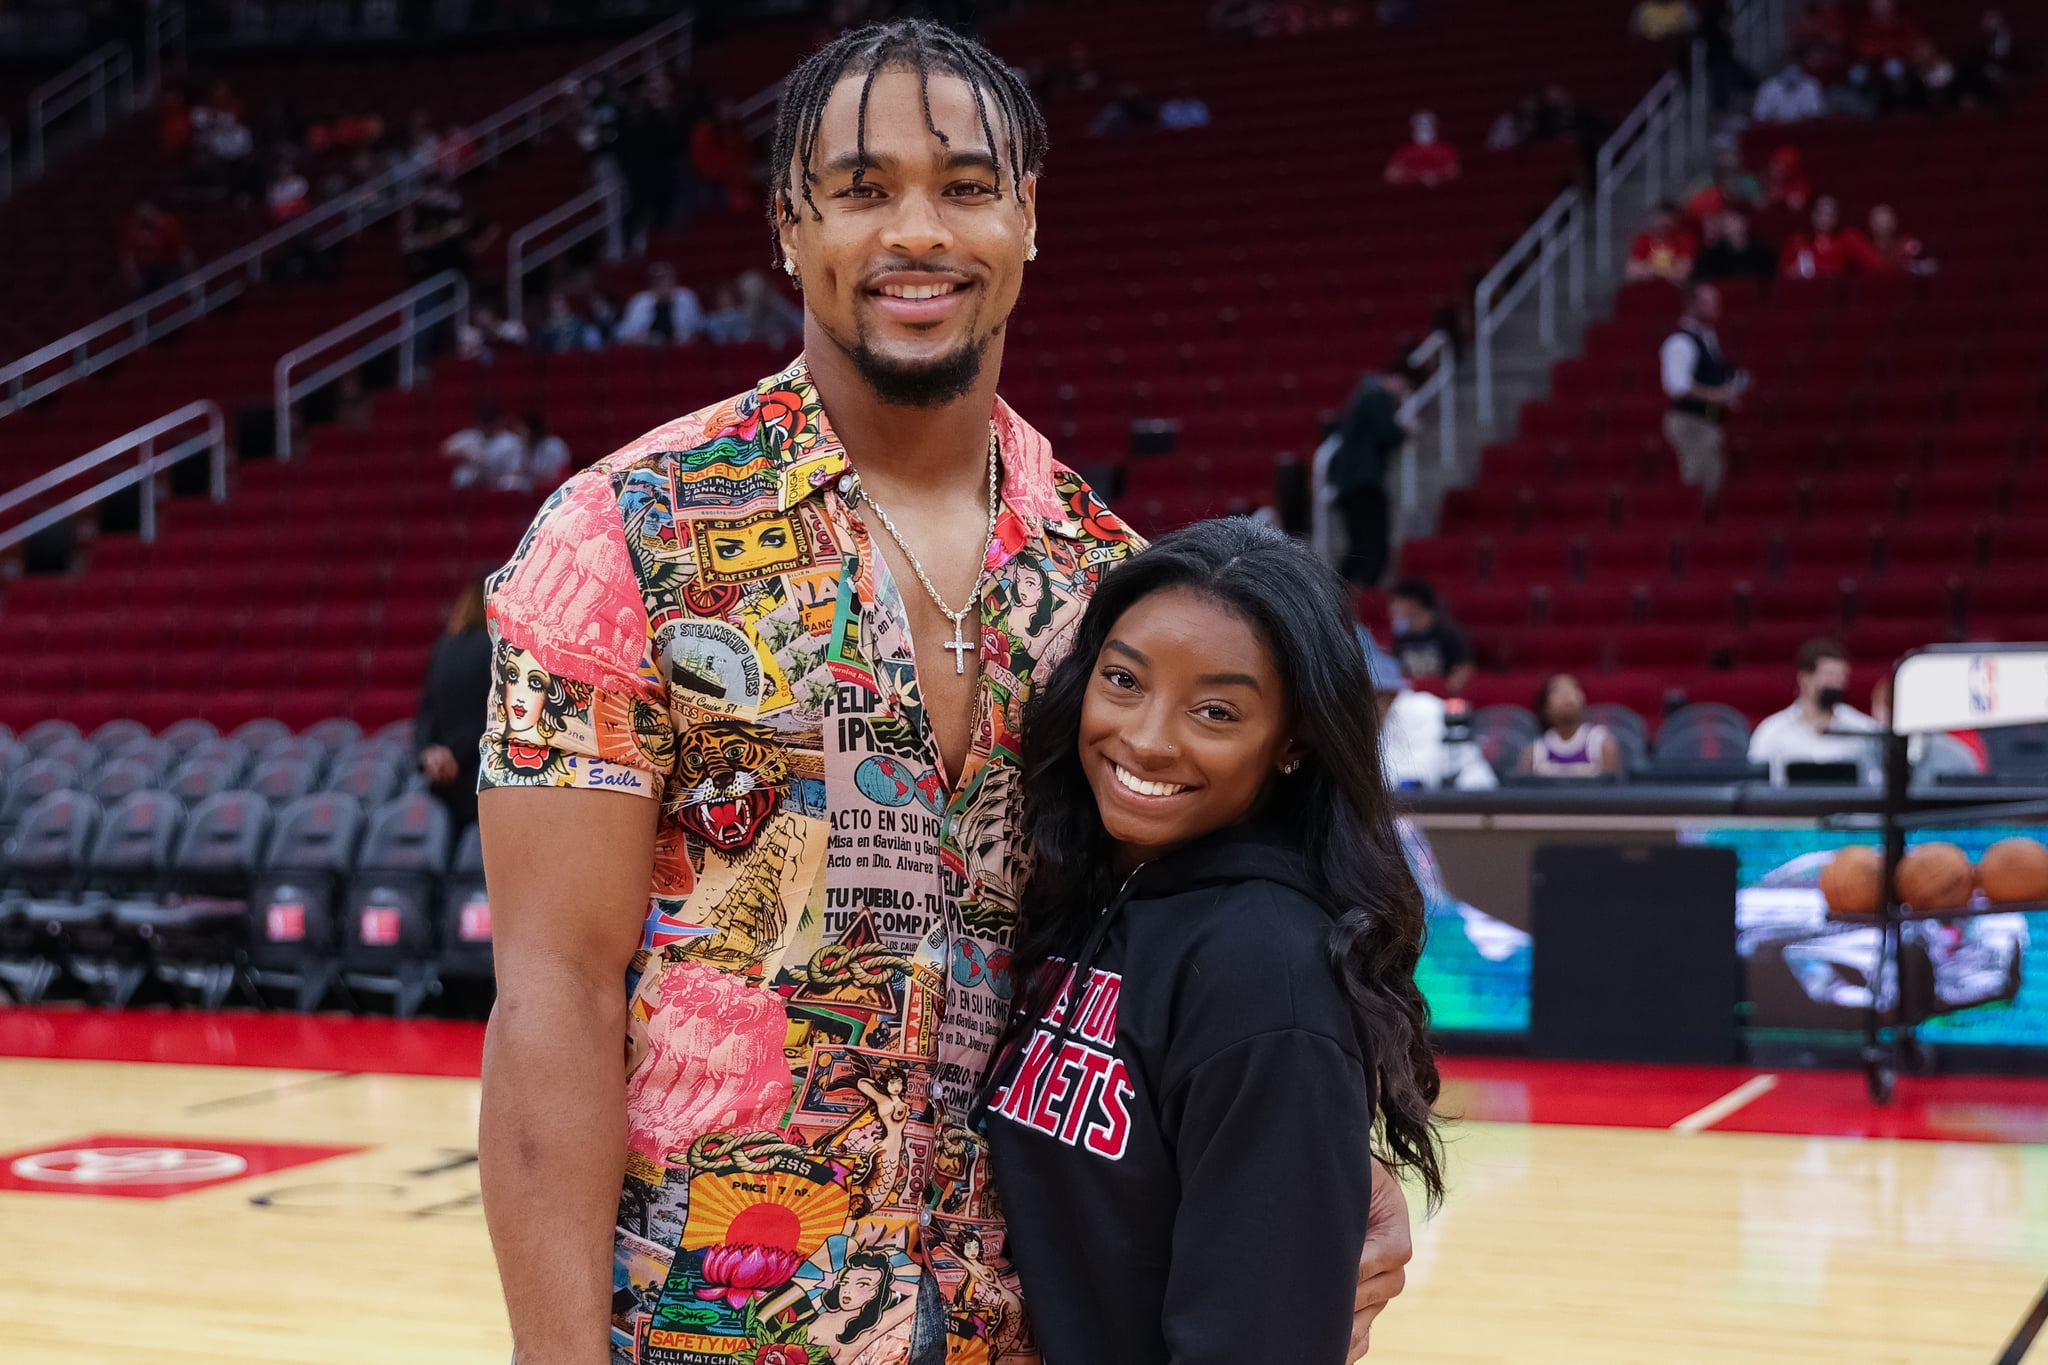 HOUSTON, TEXAS - DECEMBER 28: Simone Biles and Jonathan Owens attend a game between the Houston Rockets and the Los Angeles Lakers at Toyota Center on December 28, 2021 in Houston, Texas. NOTE TO USER: User expressly acknowledges and agrees that, by downloading and or using this photograph, User is consenting to the terms and conditions of the Getty Images License Agreement. (Photo by Carmen Mandato/Getty Images)